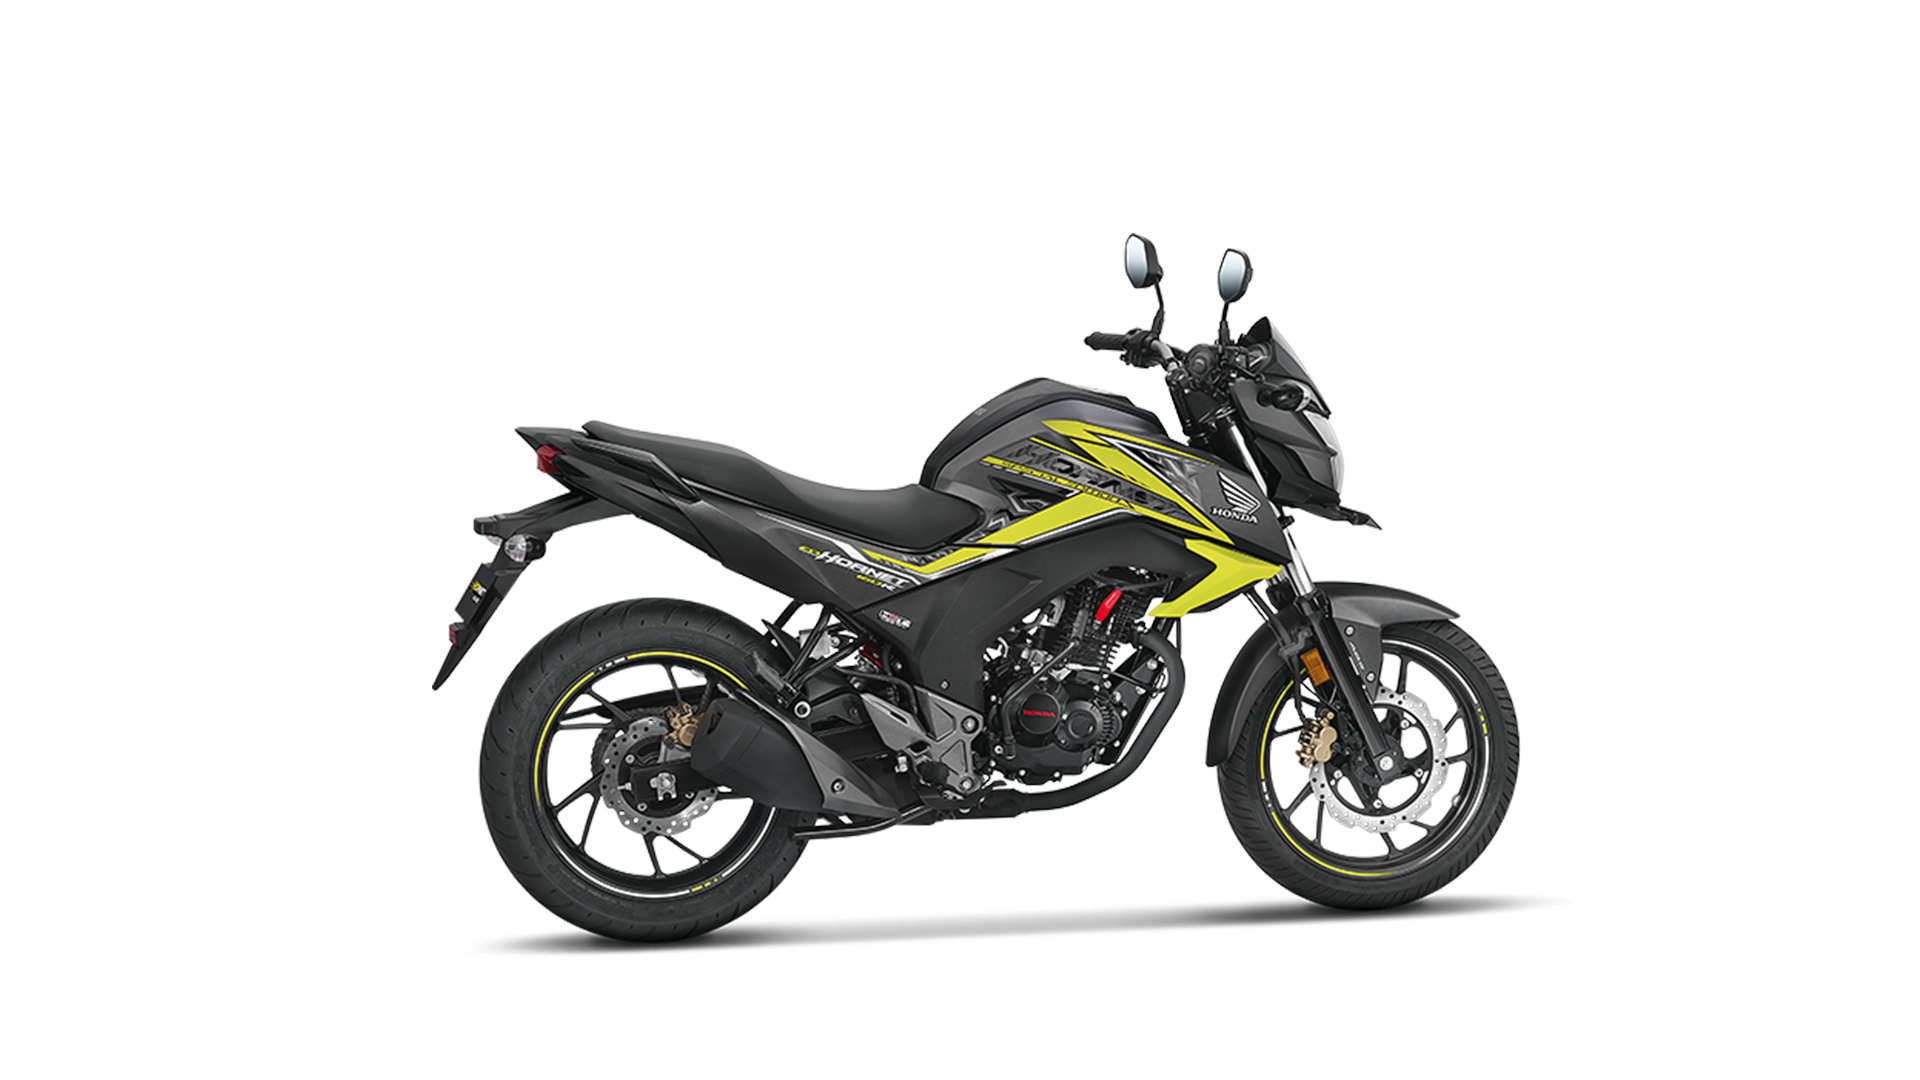 Honda Hornet Old Version / Honda Hornet Old Model Cheaper Than Retail Price Buy Clothing Accessories And Lifestyle Products For Women Men